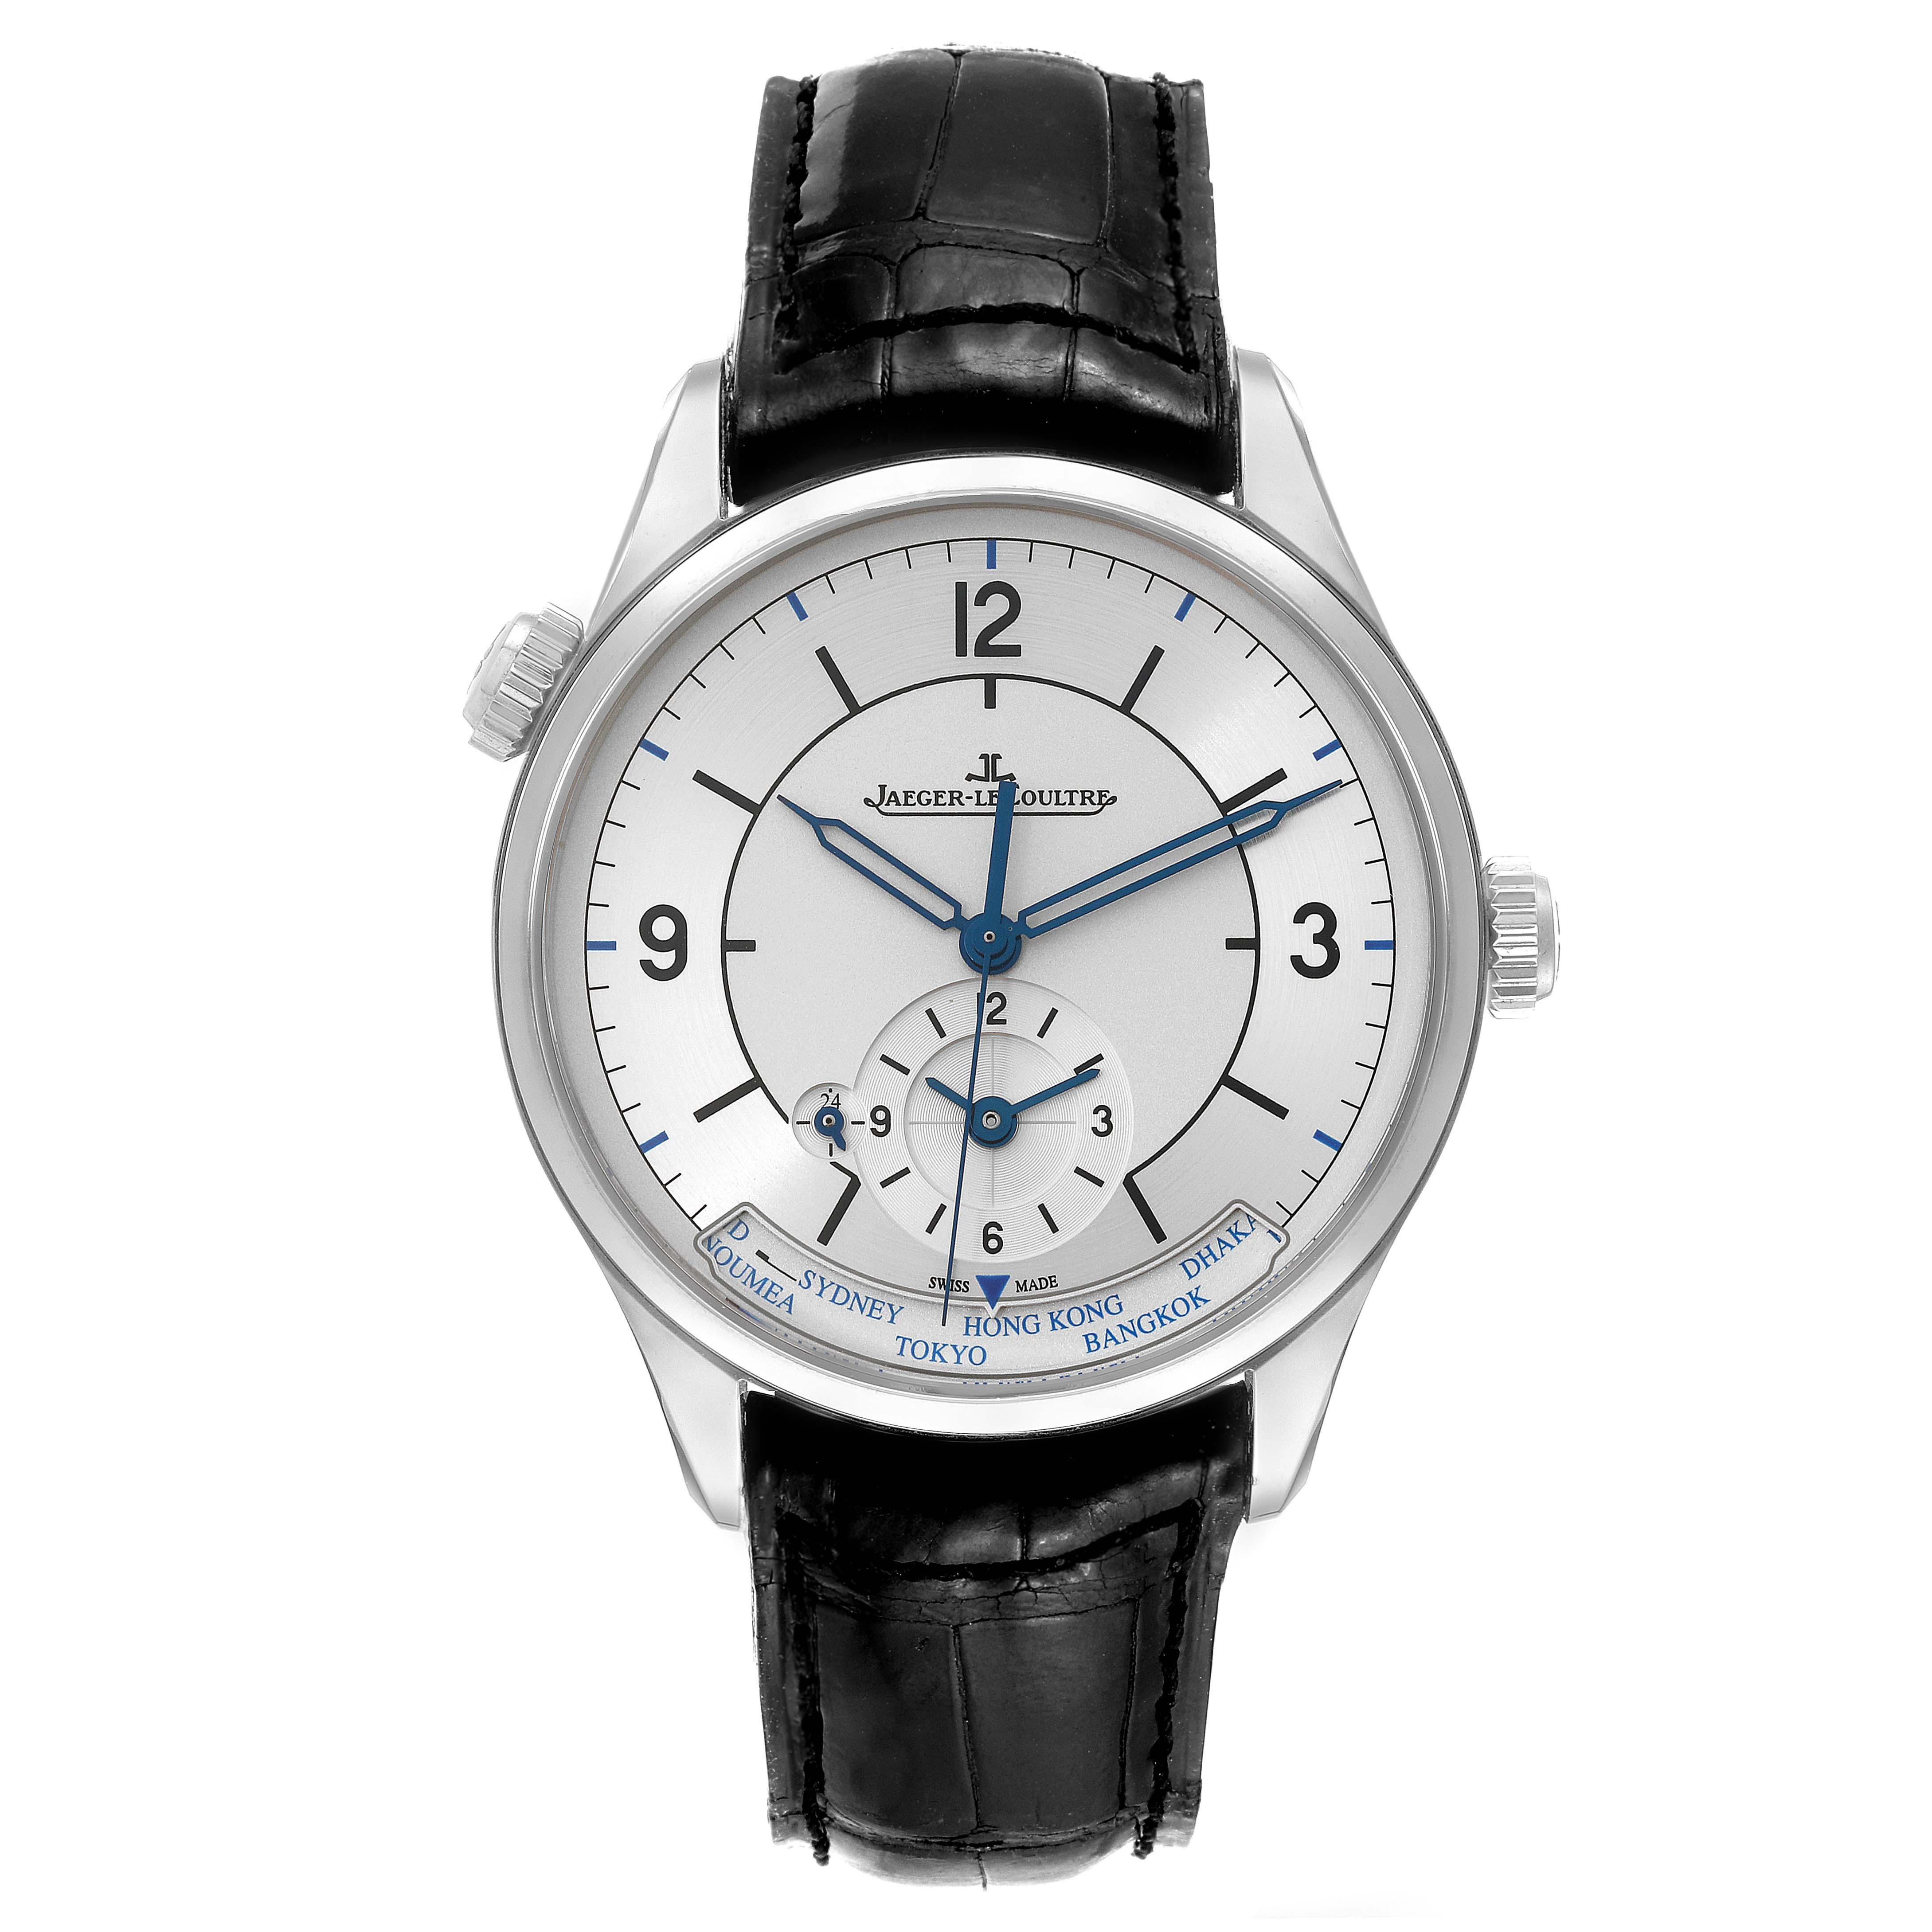 Jaeger LeCoultre Master Geographic Steel Mens Watch 176.8.92.S Q1428530 Box Card. Self-winding automatic movement. Stainless steel case 39.0 mm in diameter. Switching between the 24 city locations is via the crown at the 10 o'clock position.